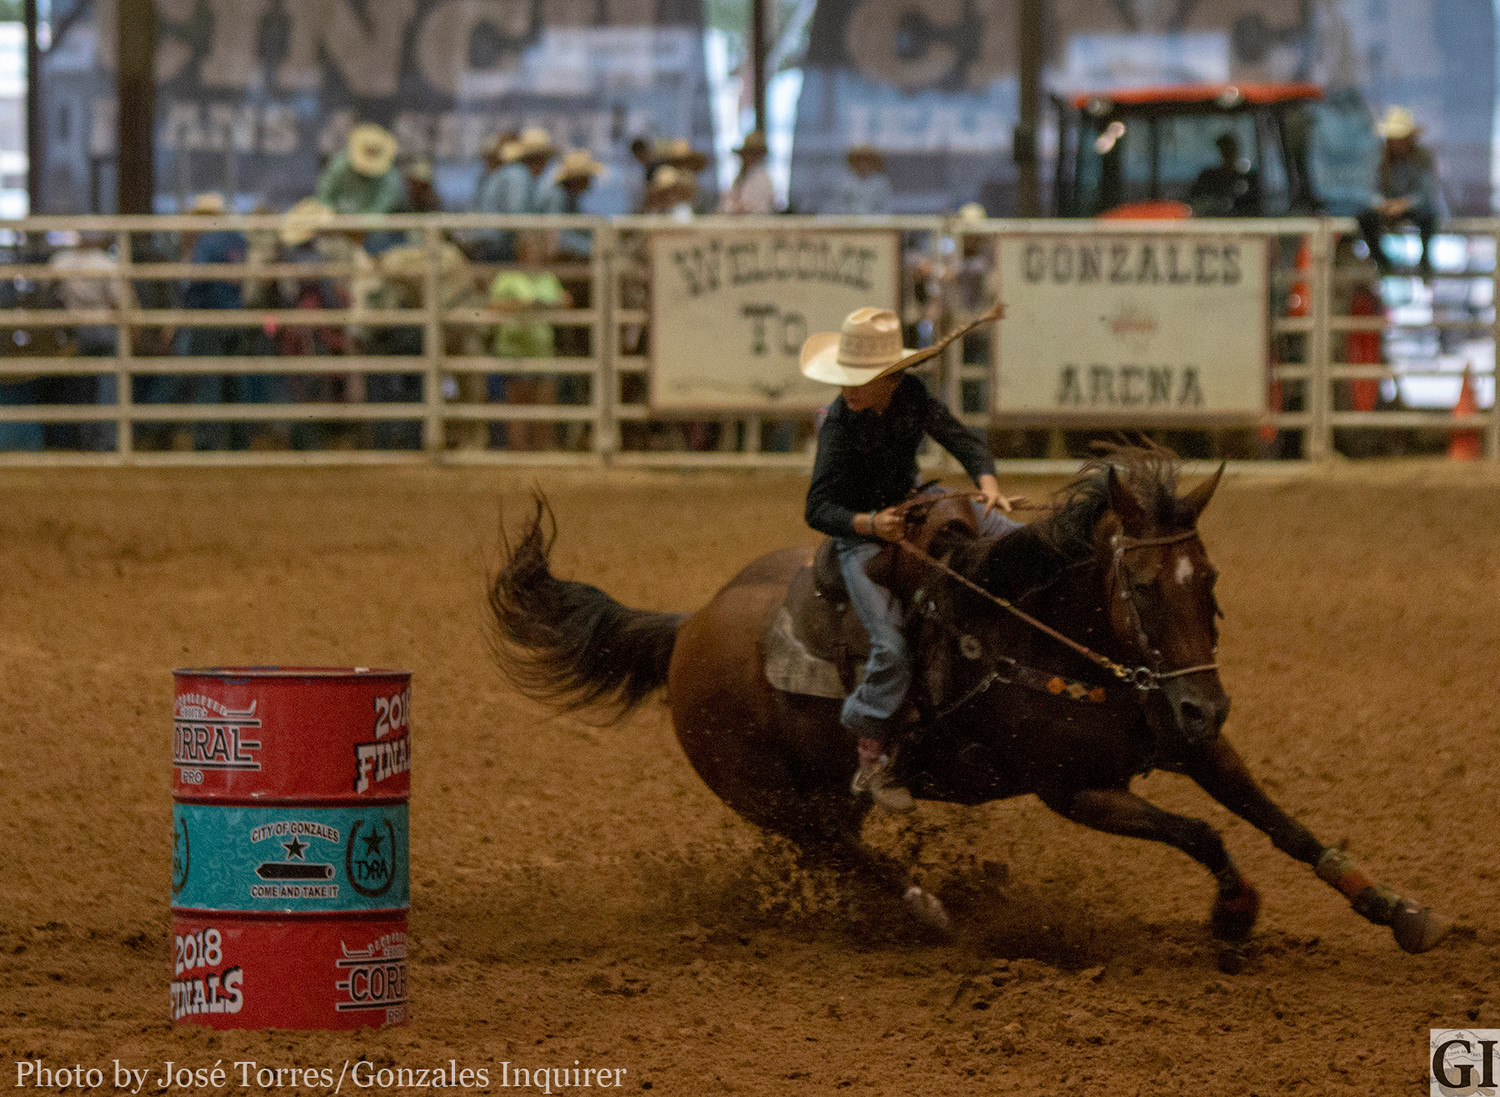 The Texas Junior High Rodeo Association’s state finals is just one of many events booked at JB Wells.